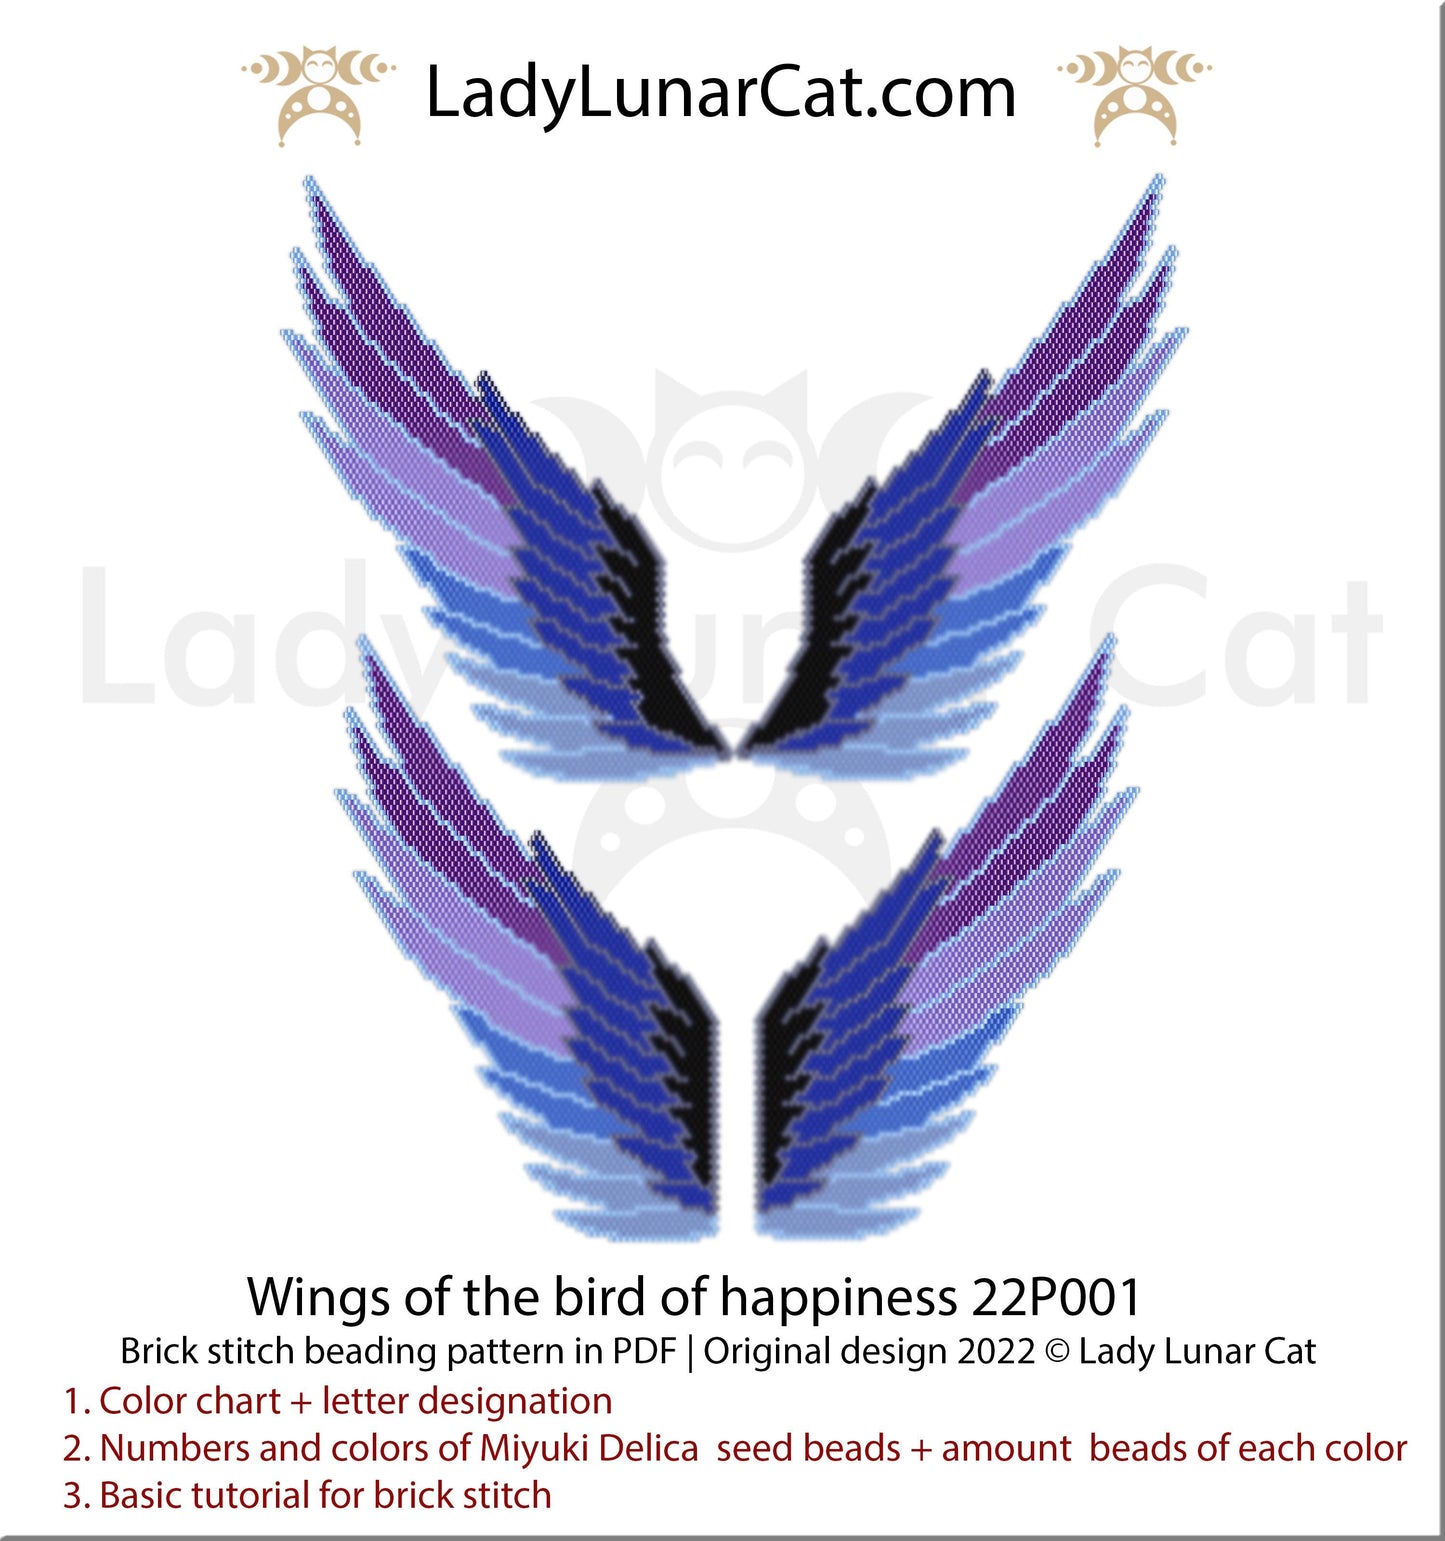 Brick stitch pattern for beading Wings of the bird of happiness 22P001 LadyLunarCat